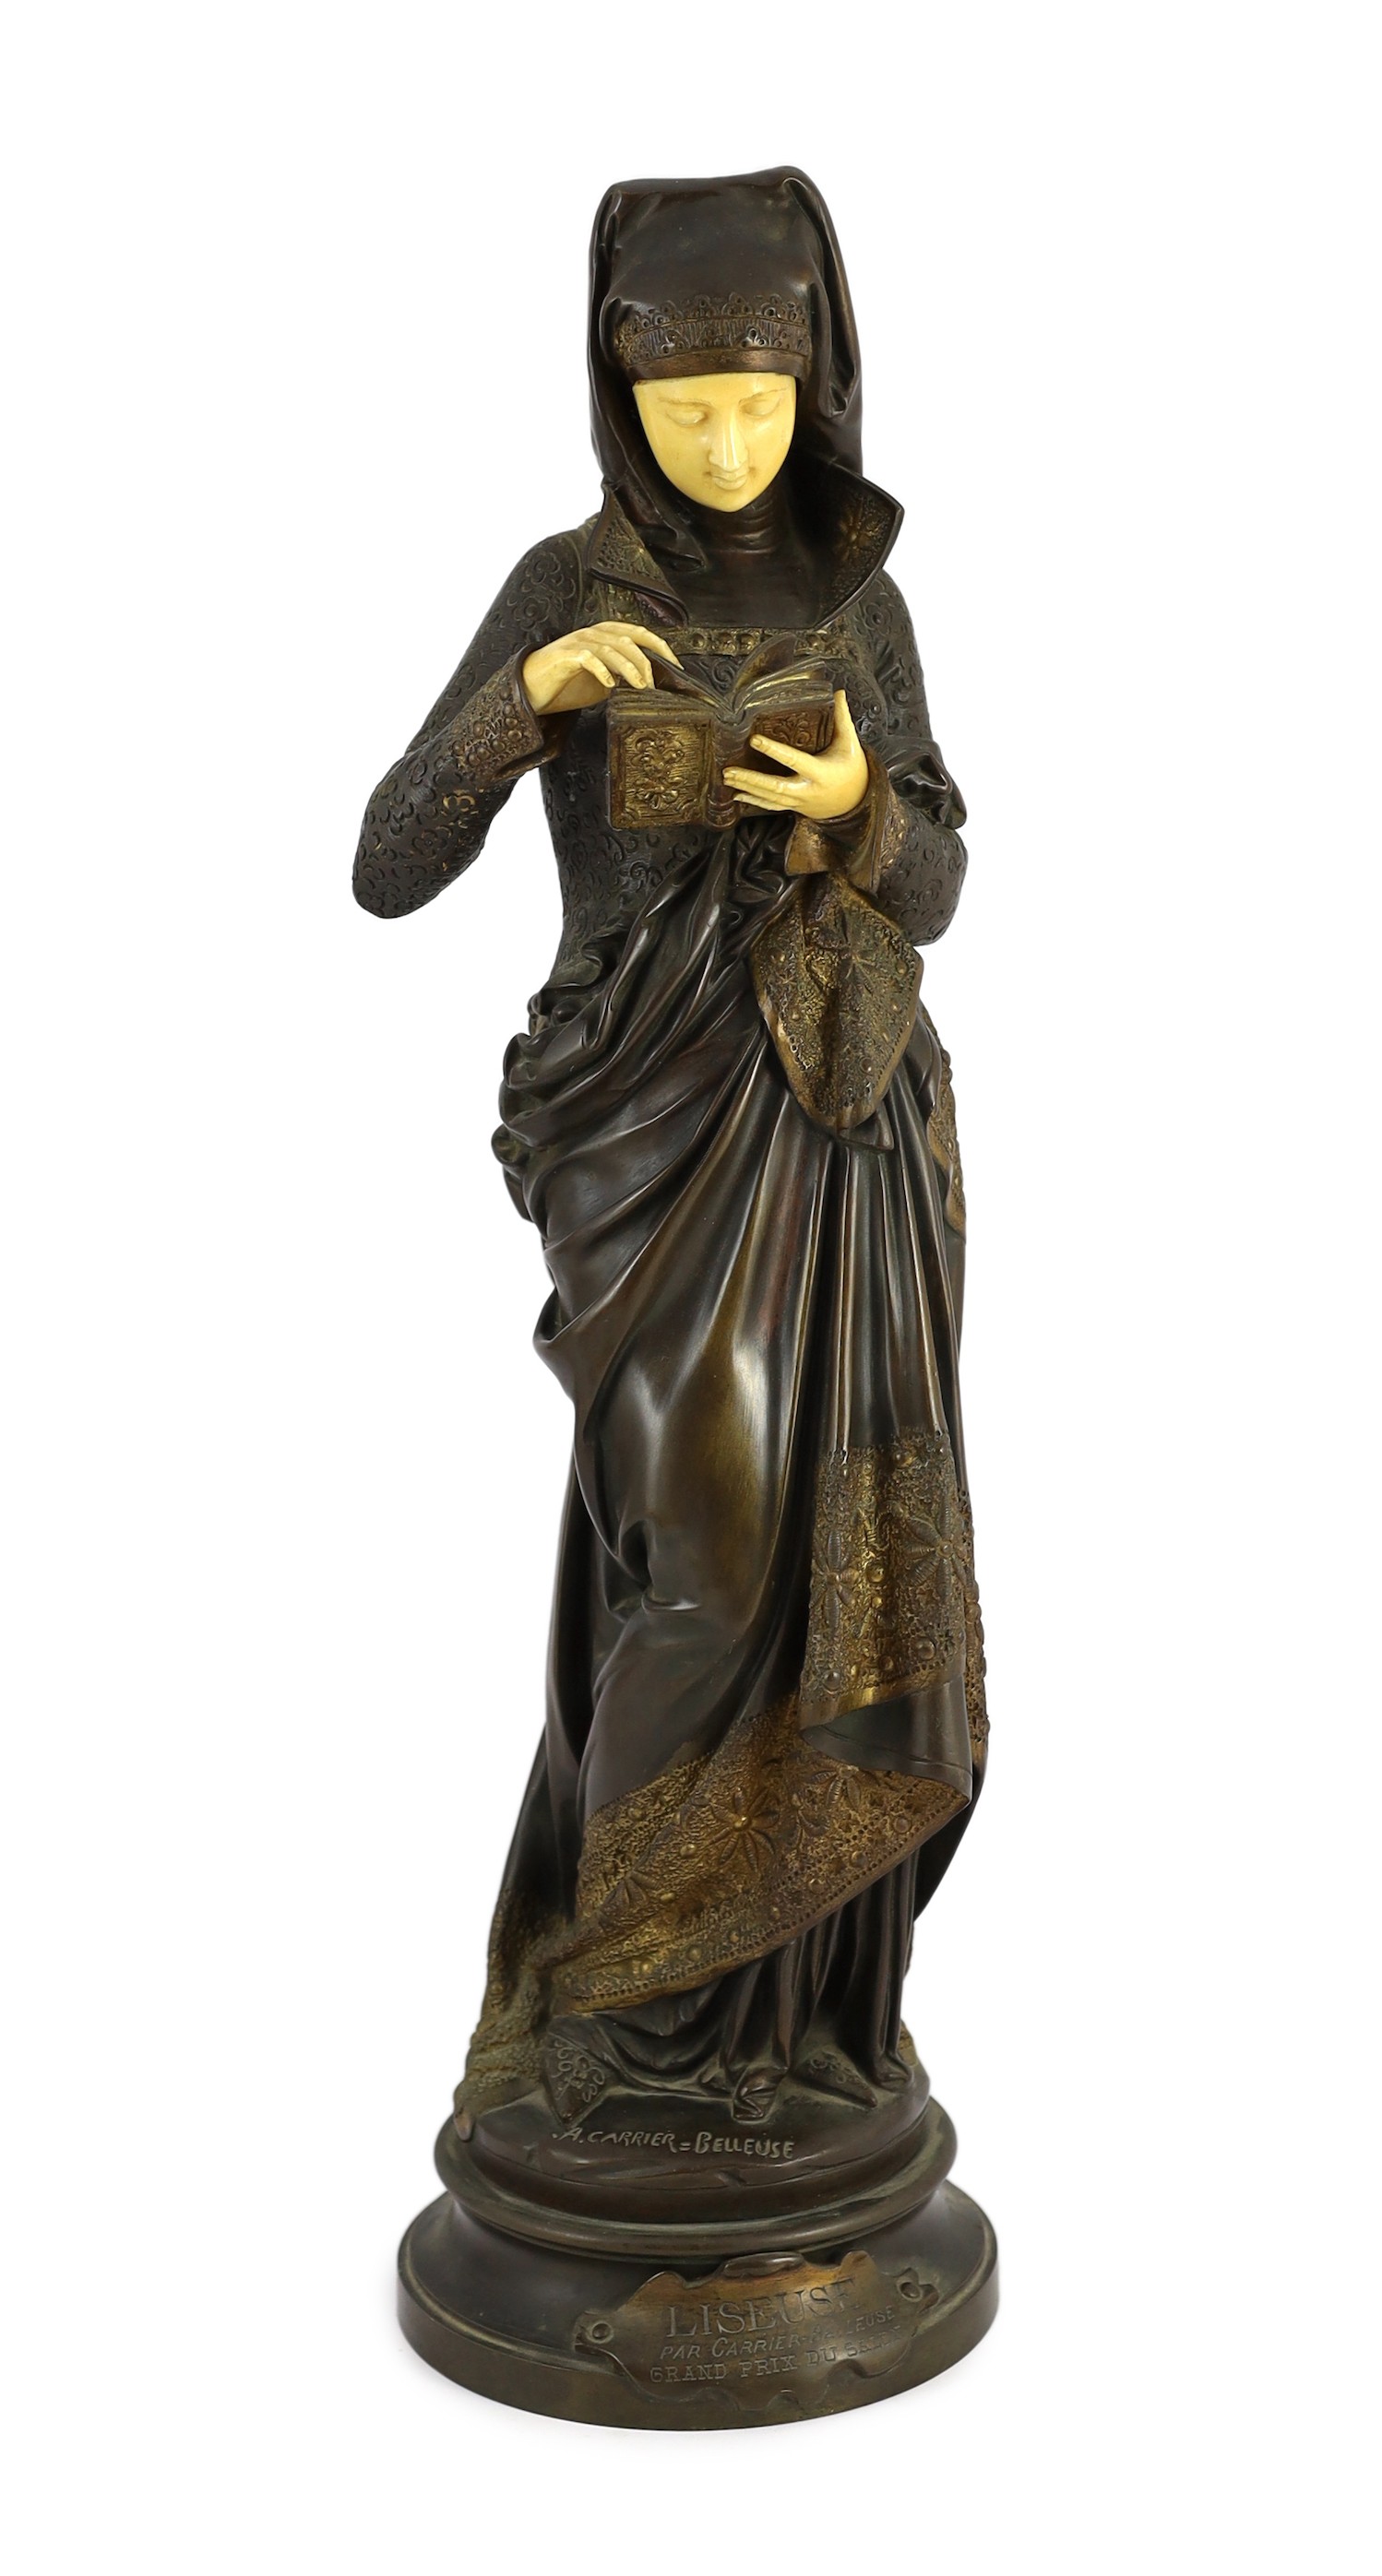 Albert-Ernest Carrier-Belleuse (French, 1824-1887). A parcel gilt bronze and ivory figure, 'Liseuse', height 60cm